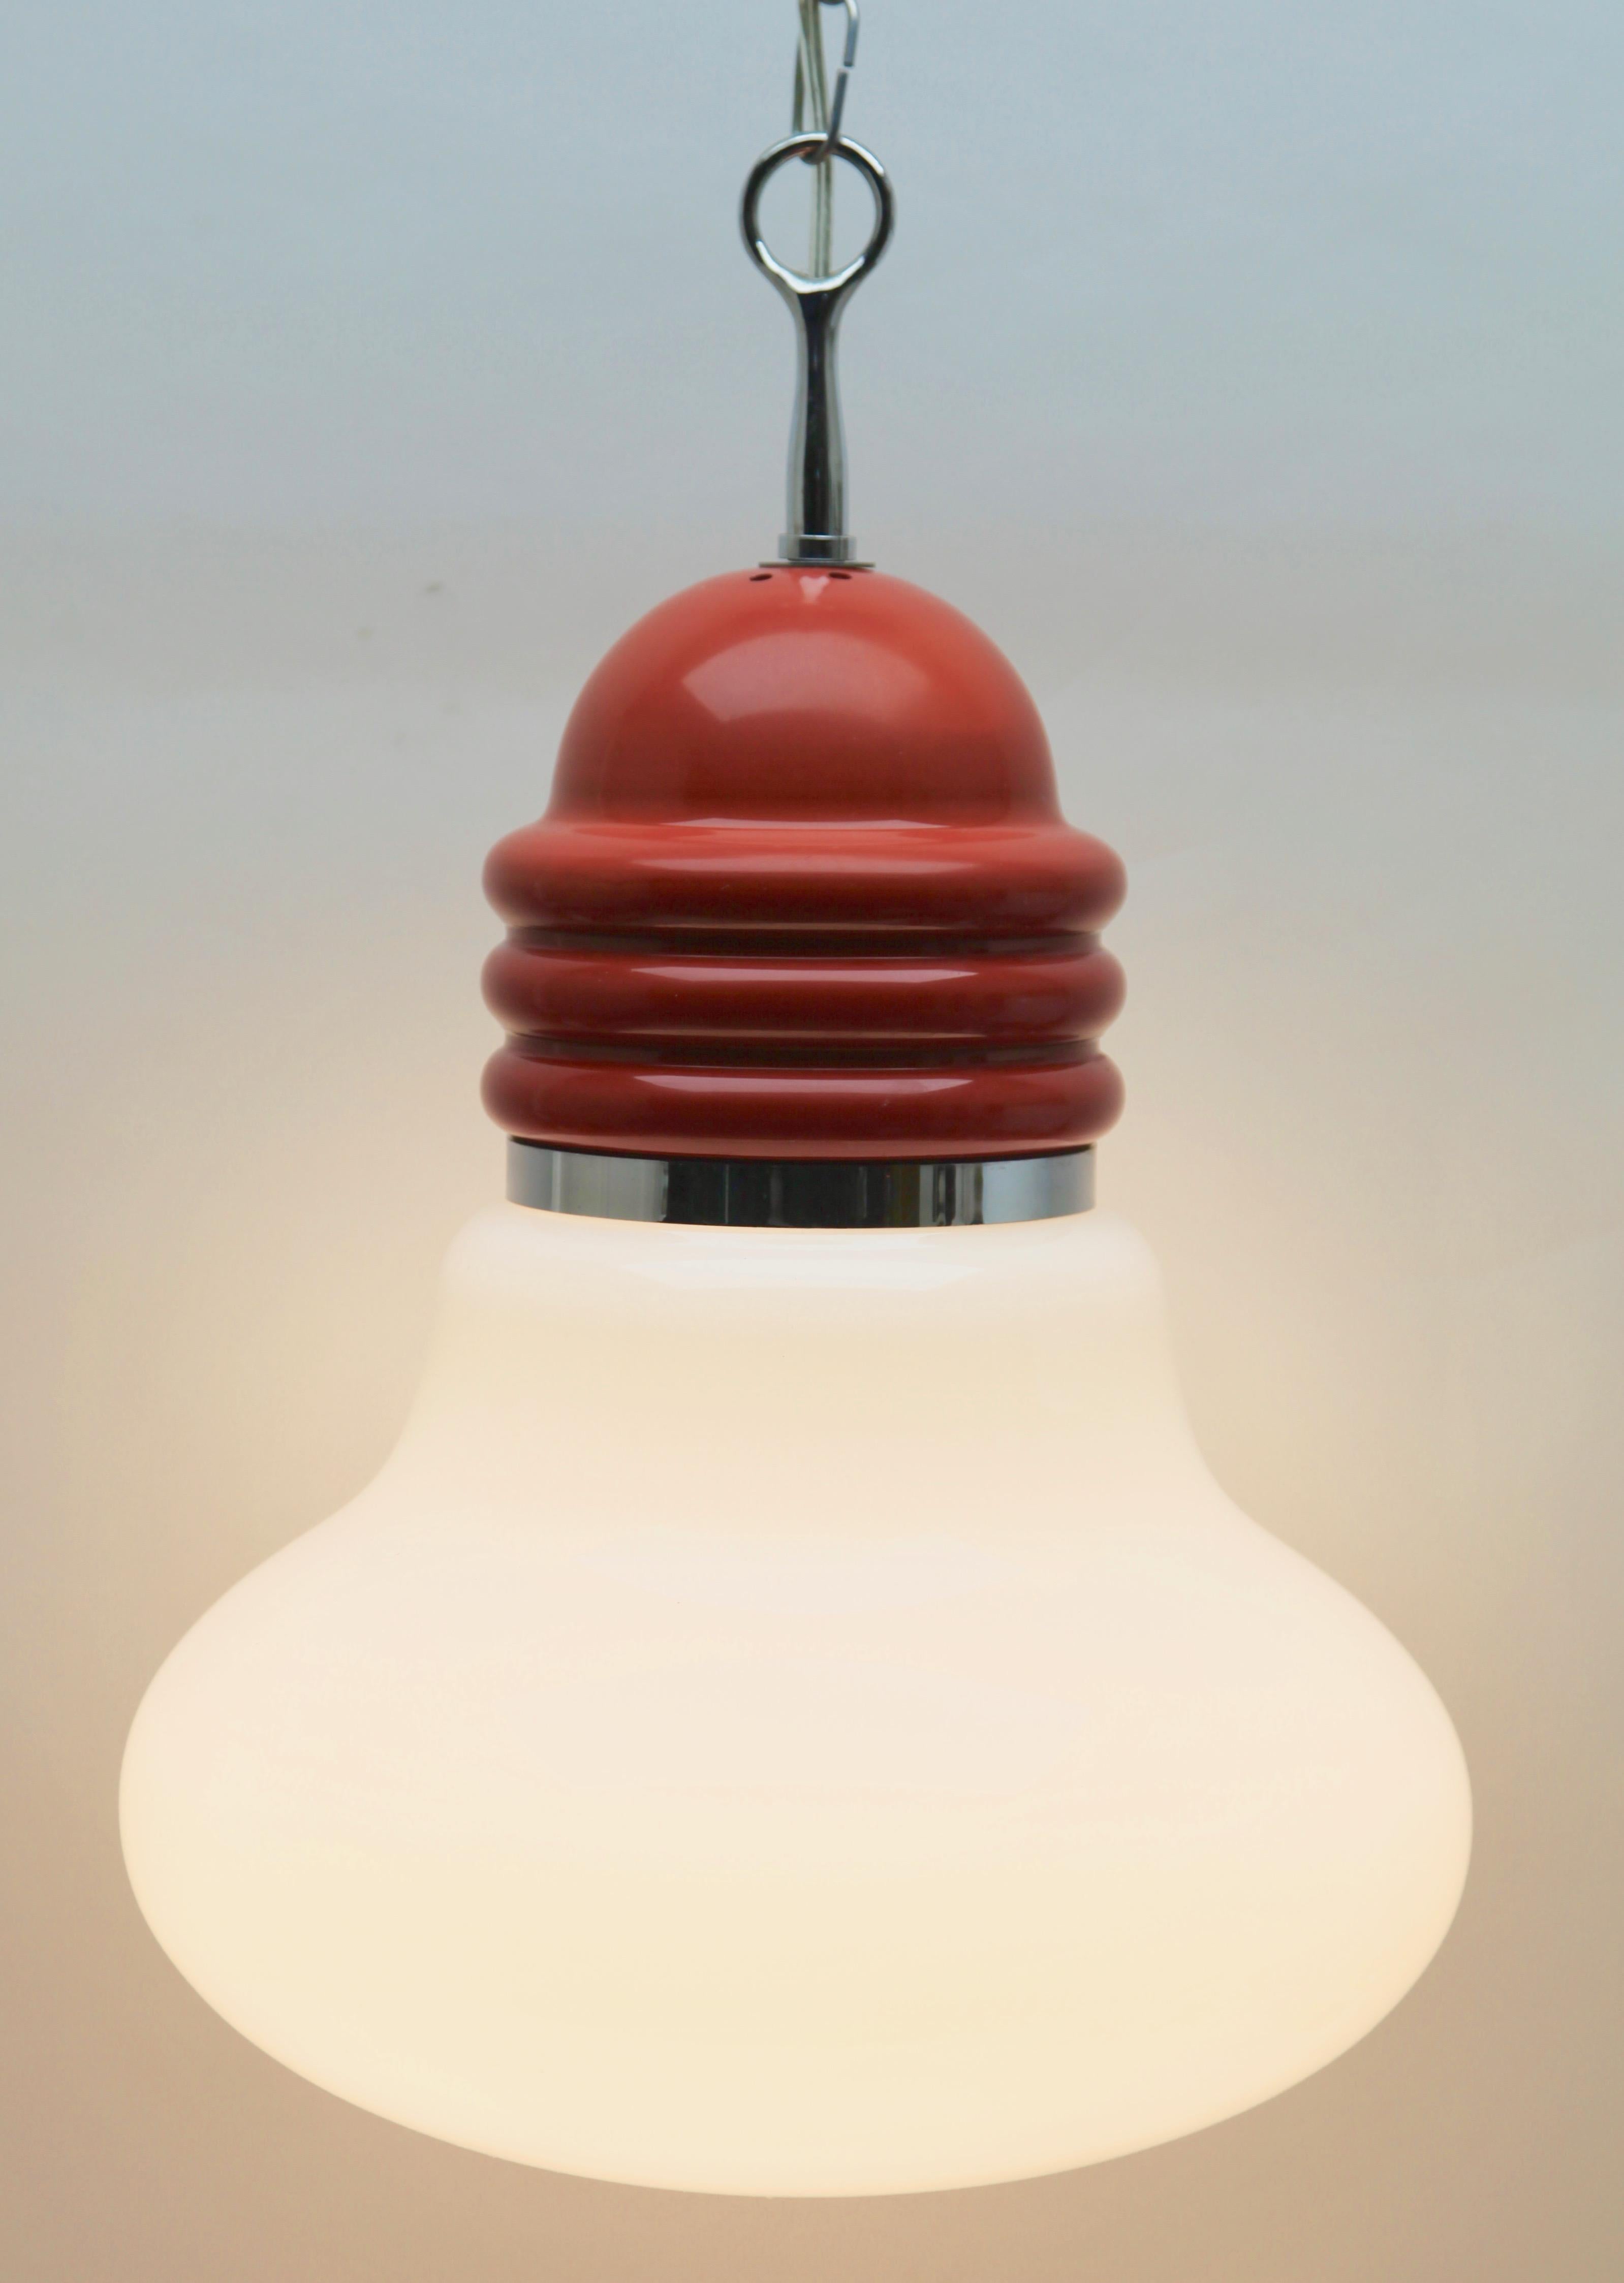 Hand-Crafted Vintage Pendant Ceiling Light in the Schape of a Big Bulb, Opaque Glass, 1960s For Sale